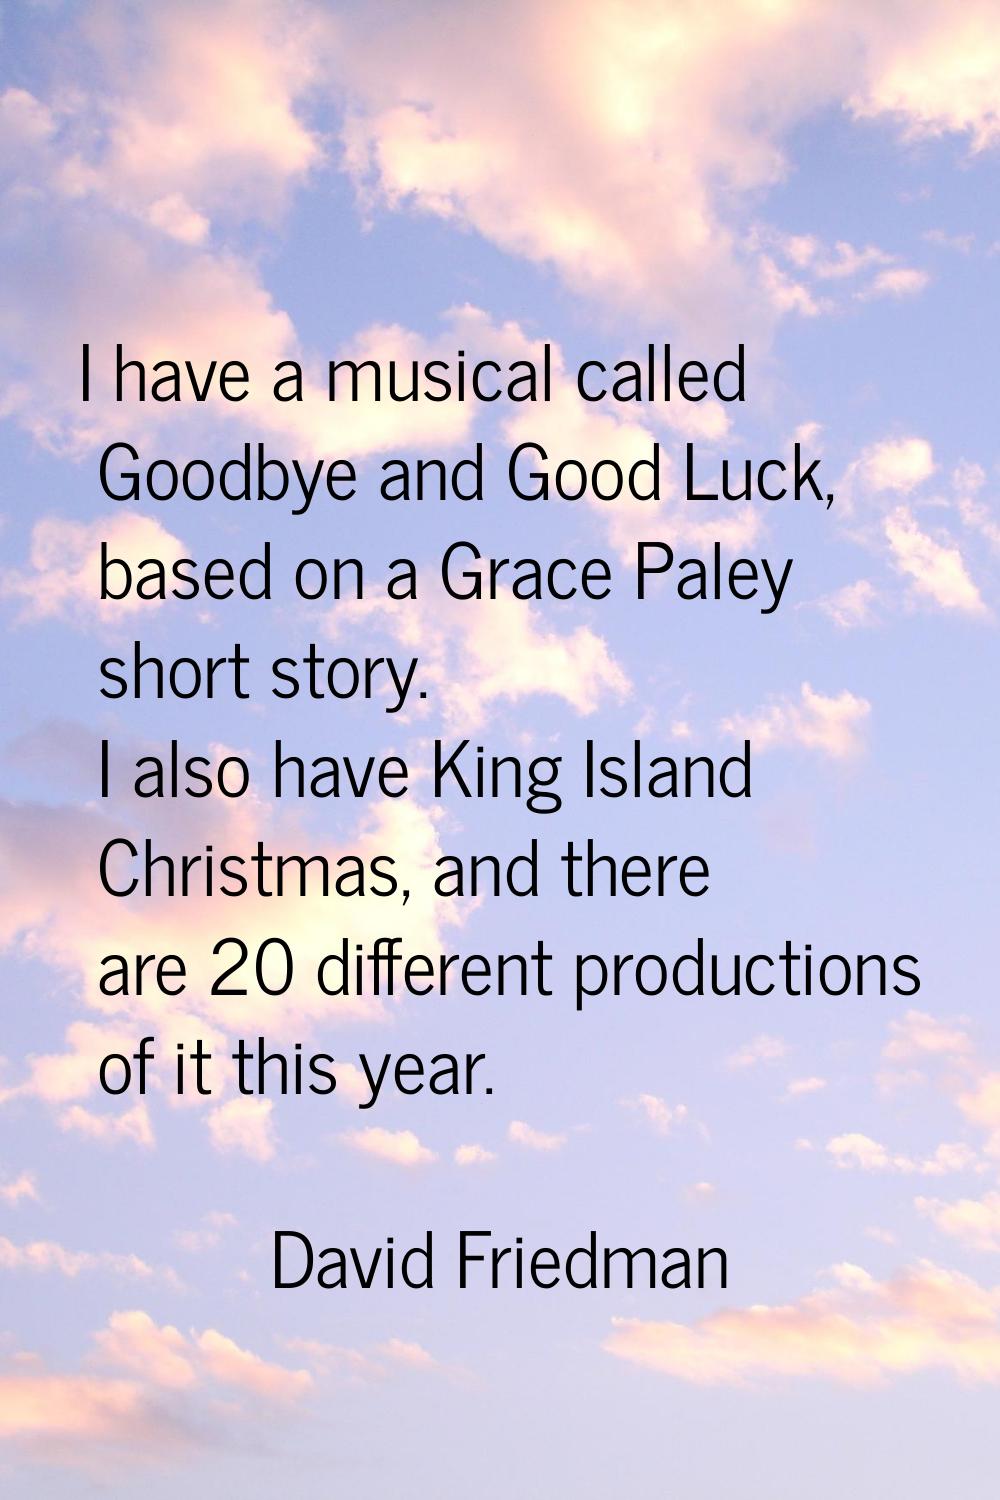 I have a musical called Goodbye and Good Luck, based on a Grace Paley short story. I also have King